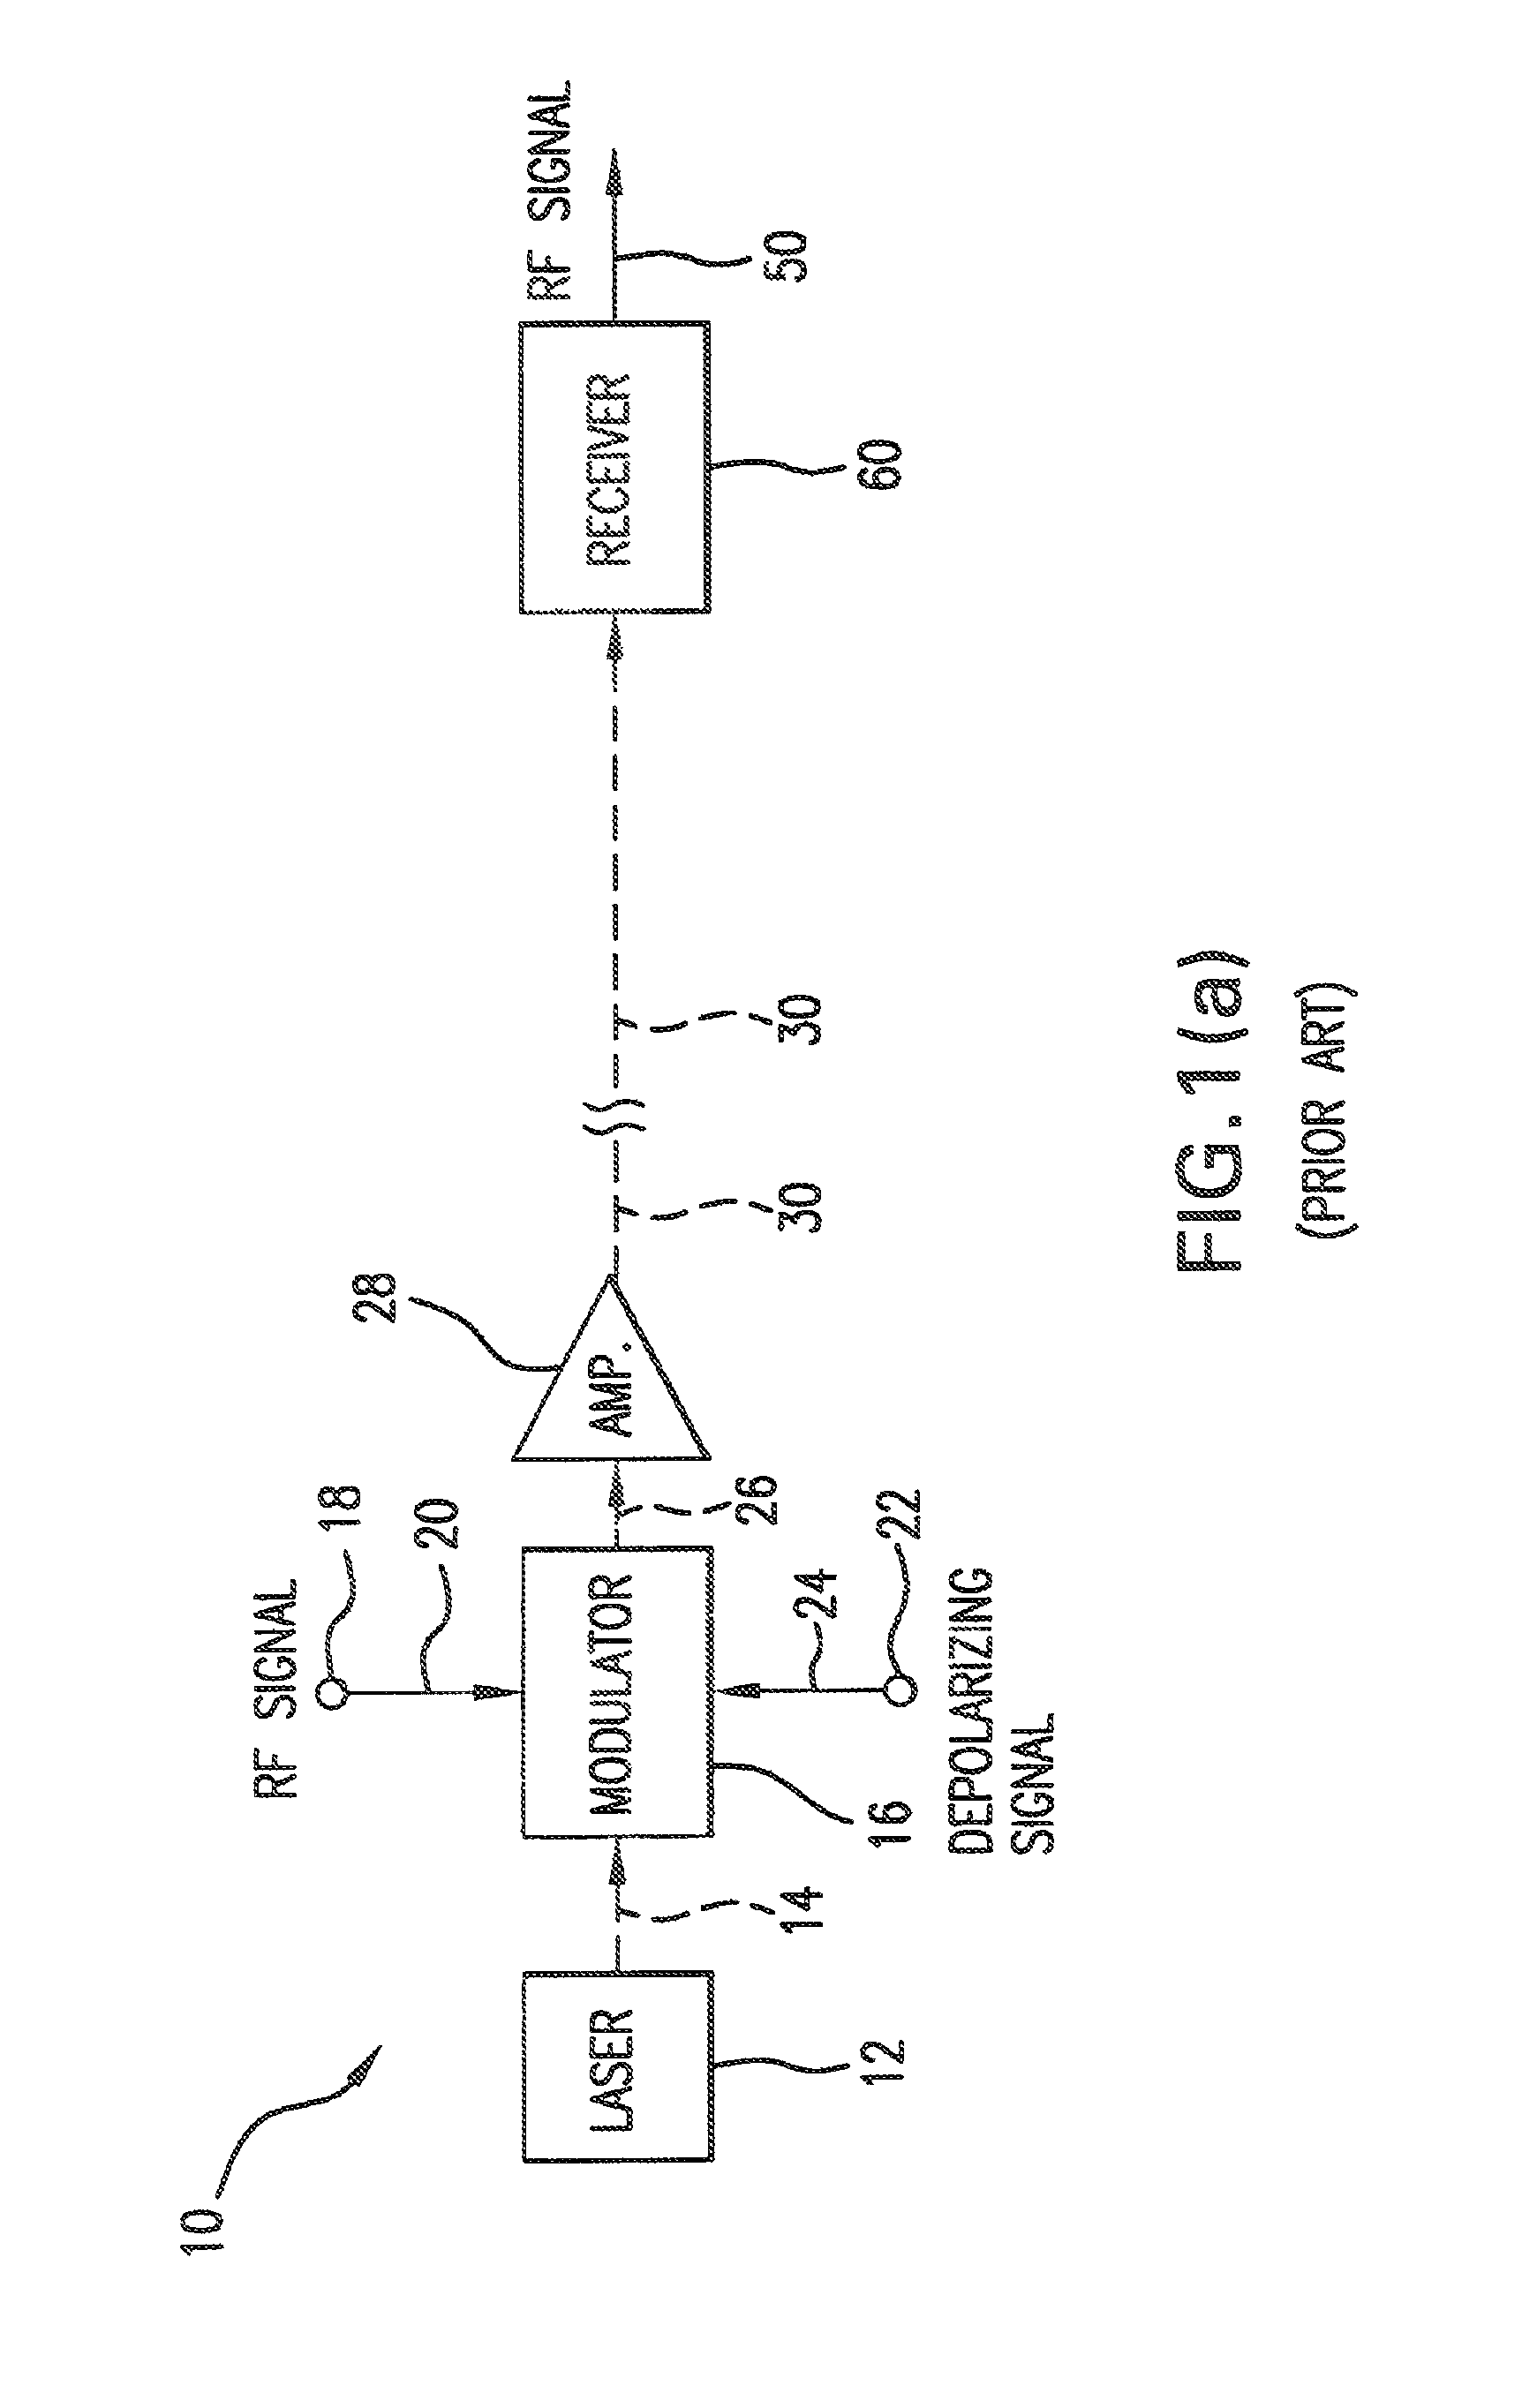 Directly modulated laser optical transmission system with phase modulation